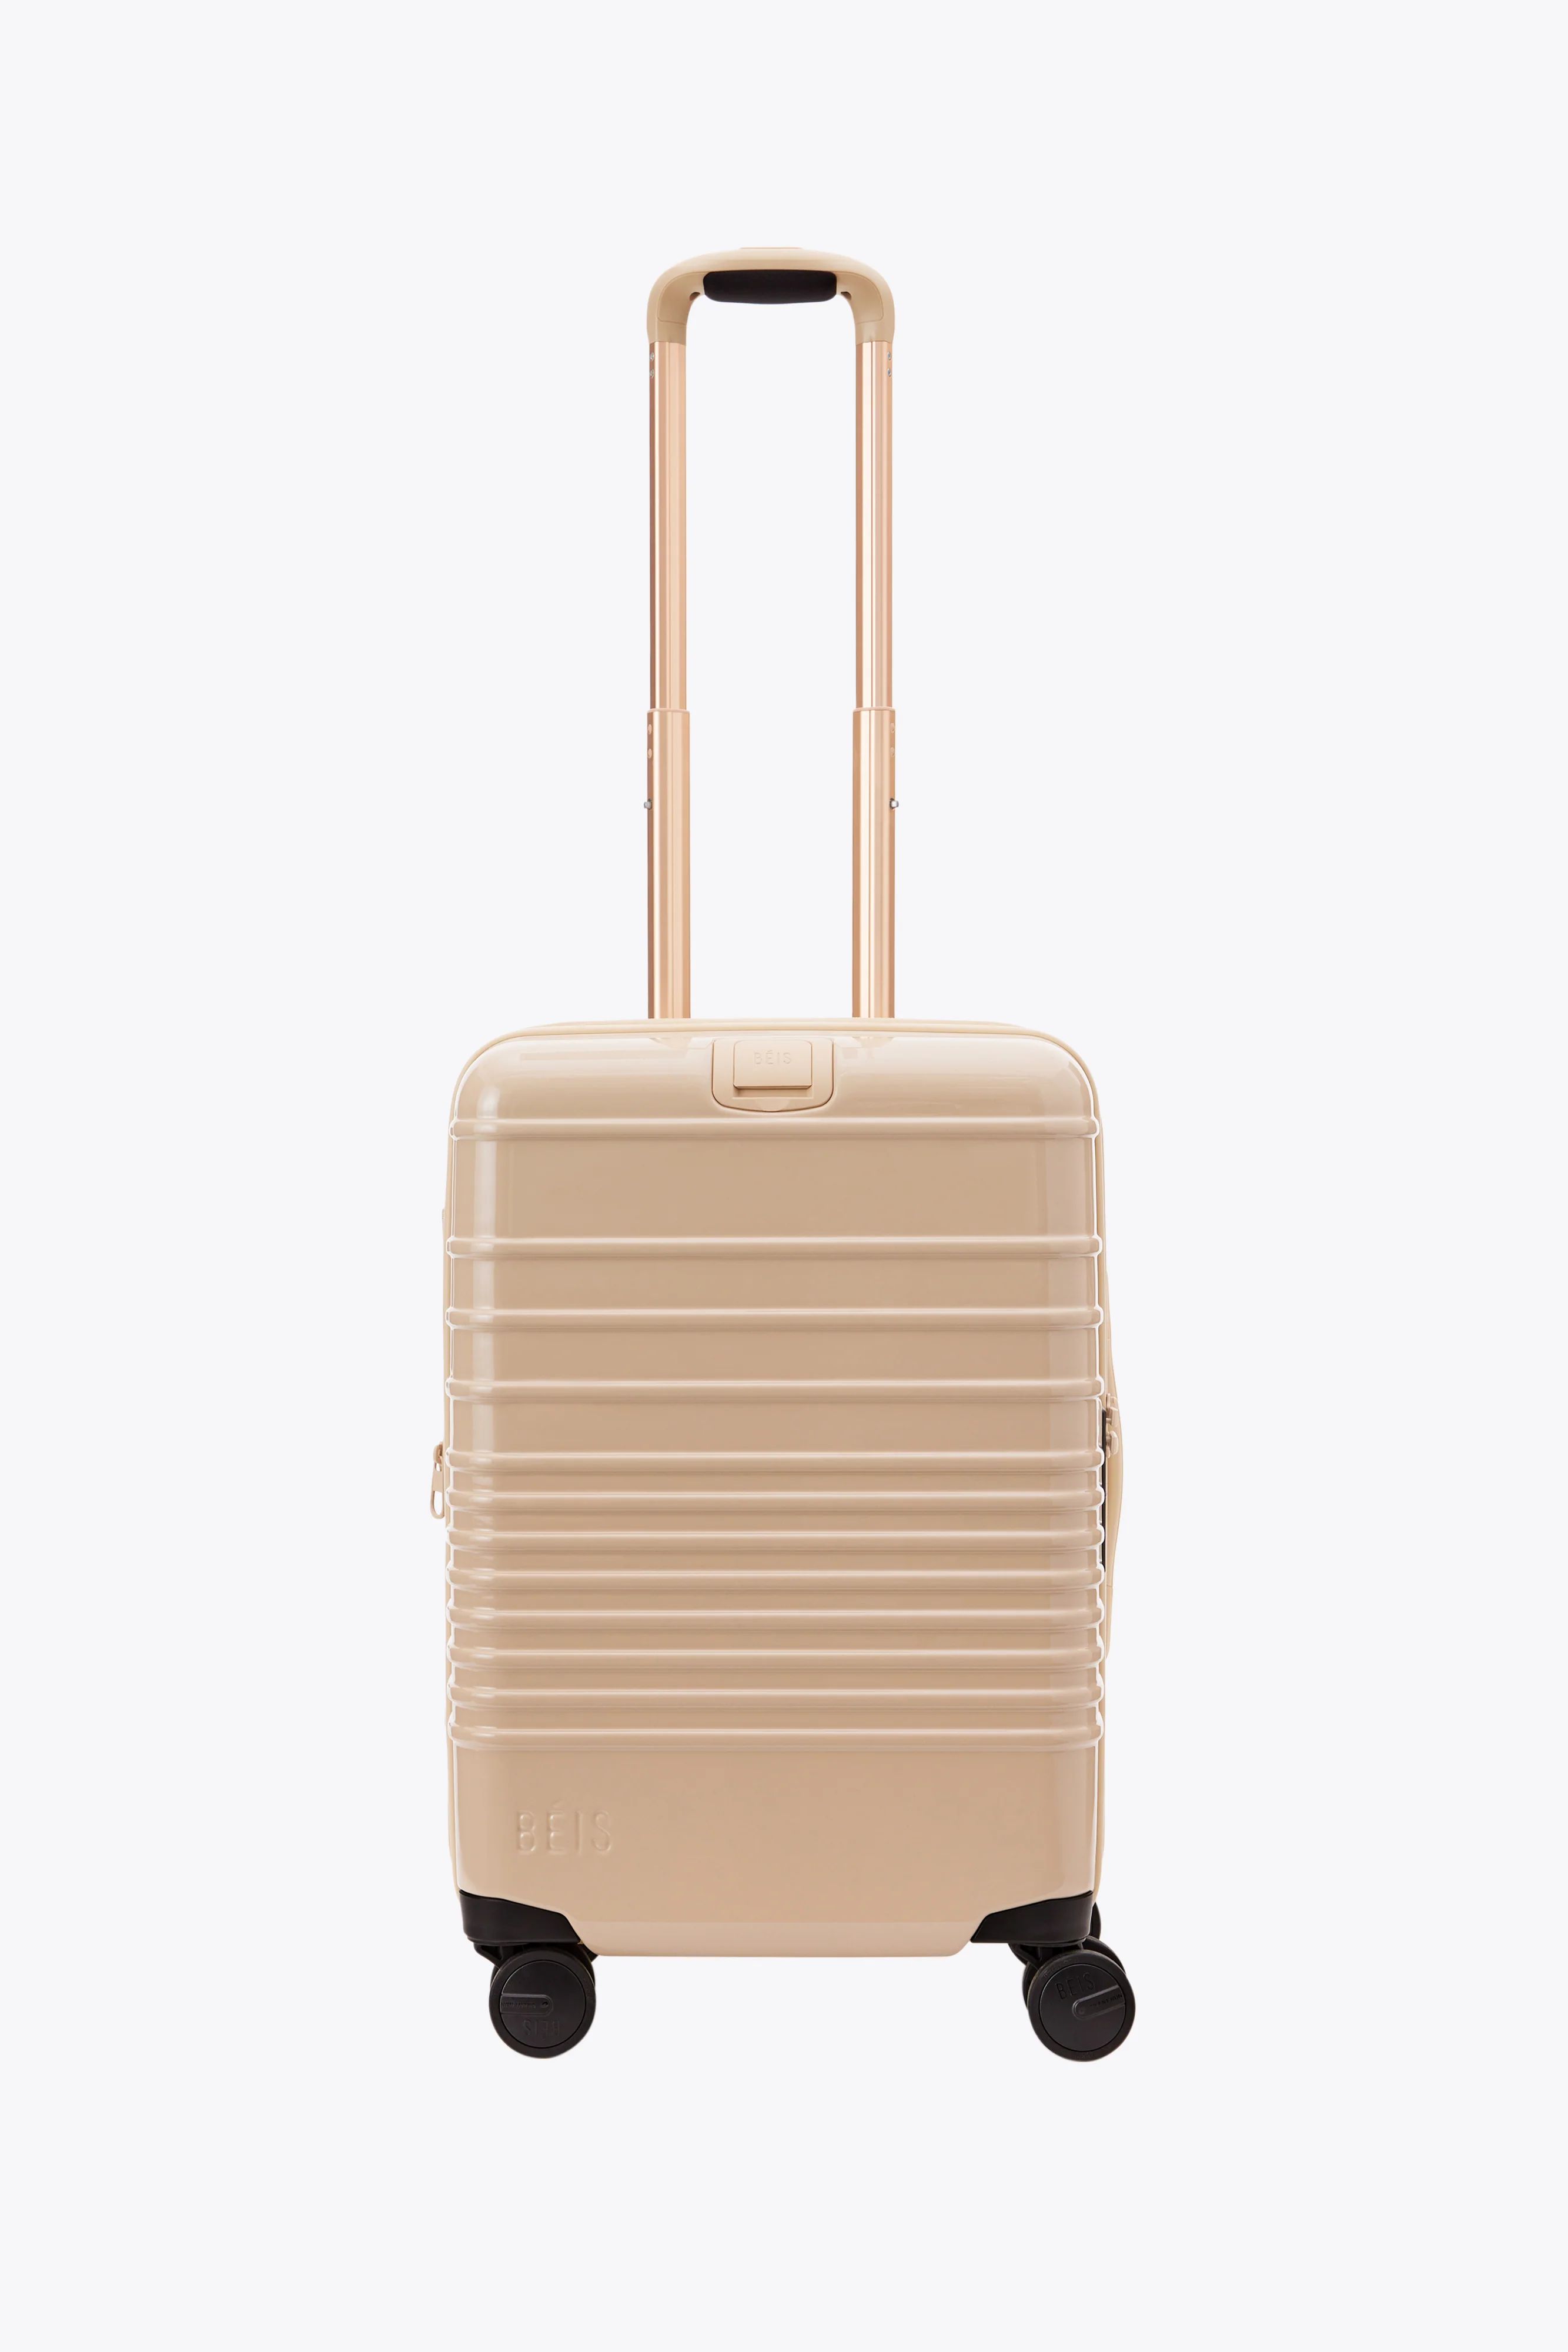 BÉIS 'The Carry-On Roller'' in Glossy Beige - High Gloss 21" Carry On Luggage in Beige | BÉIS Travel